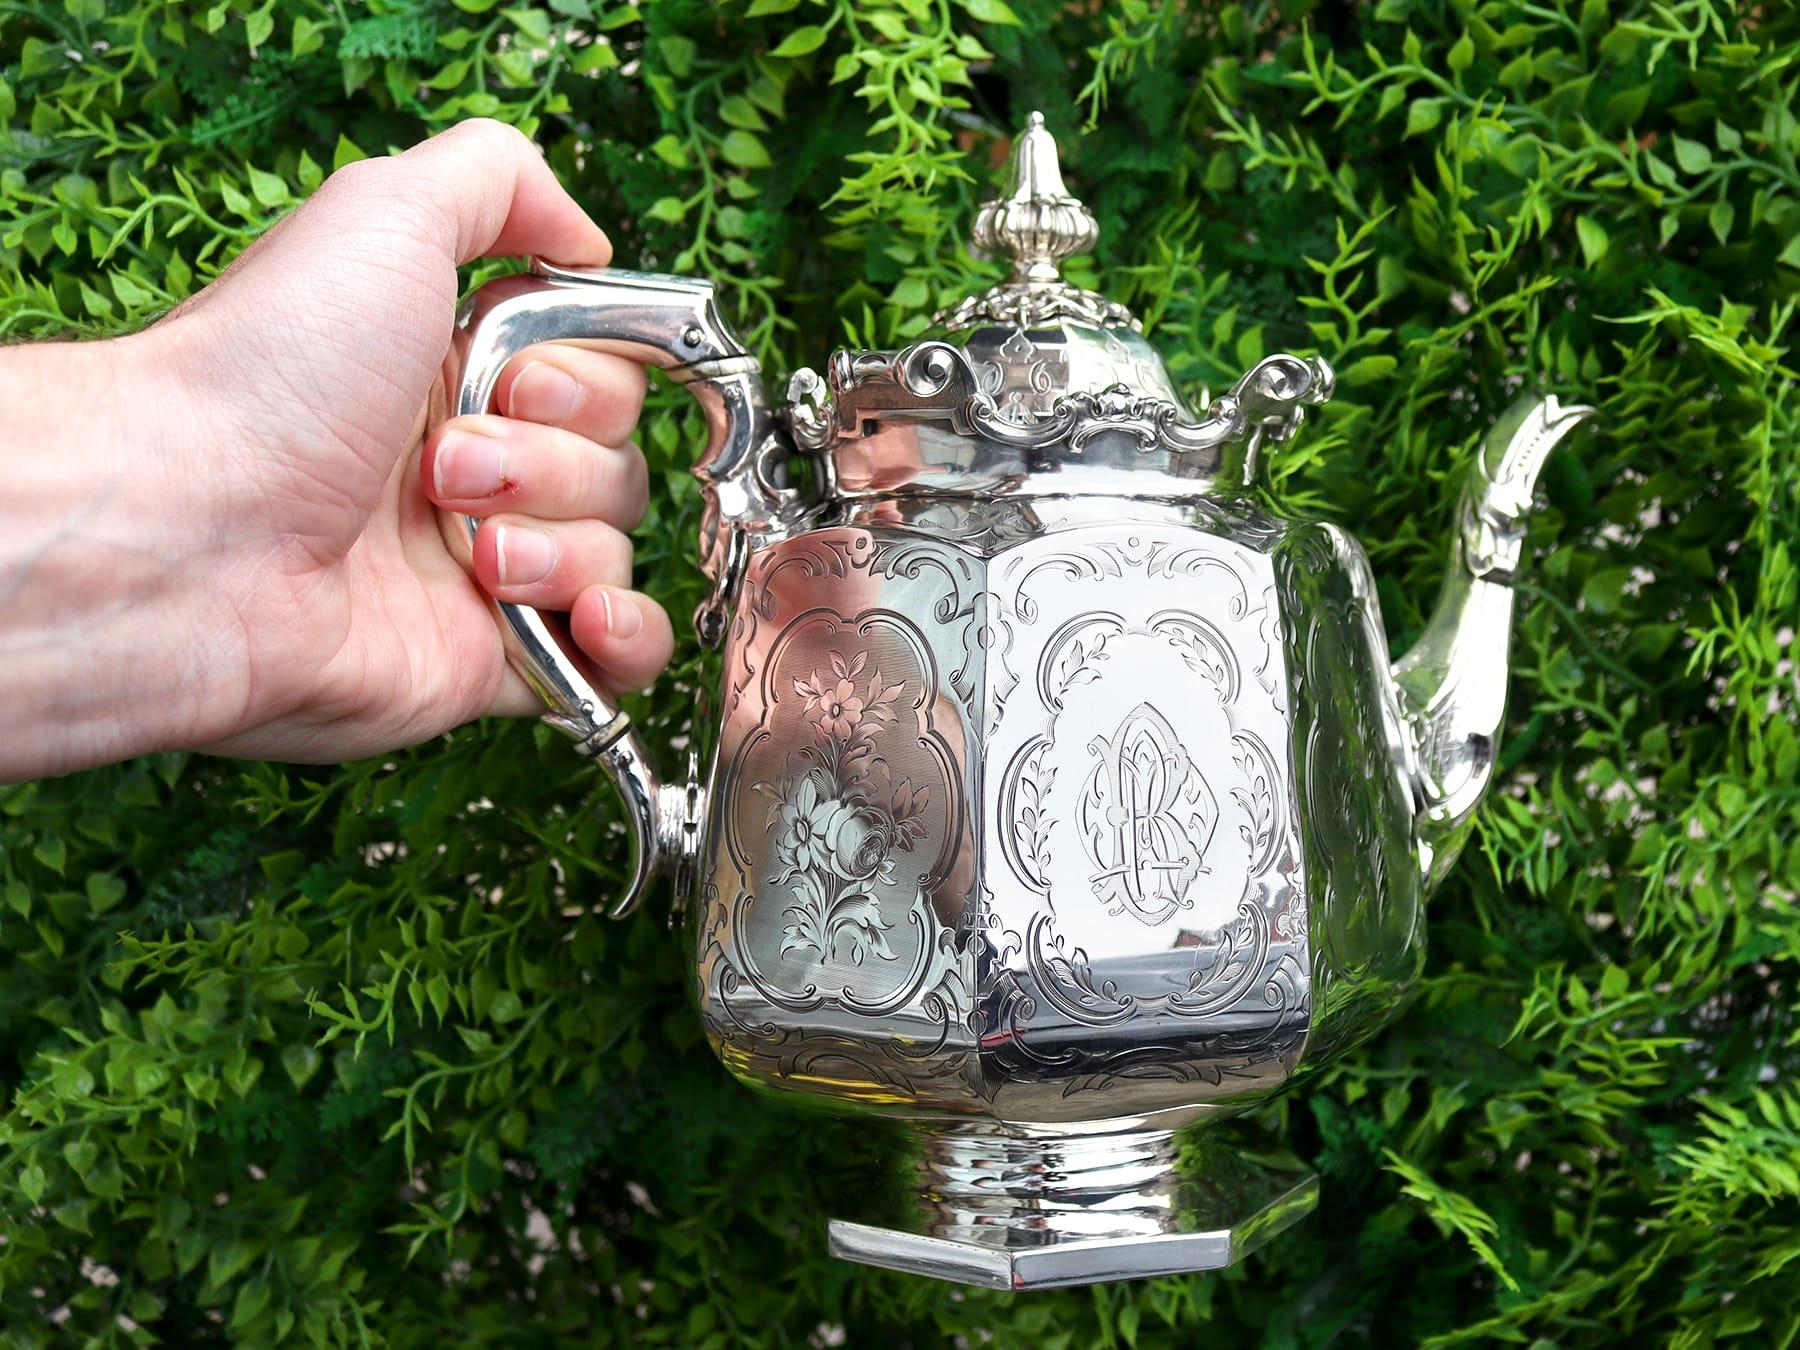 An exceptional, fine and impressive antique Victorian English sterling silver teapot; an addition to our silver teaware collection

This exceptional antique Victorian sterling silver teapot has an octagonal rounded form to an octagonal panelled